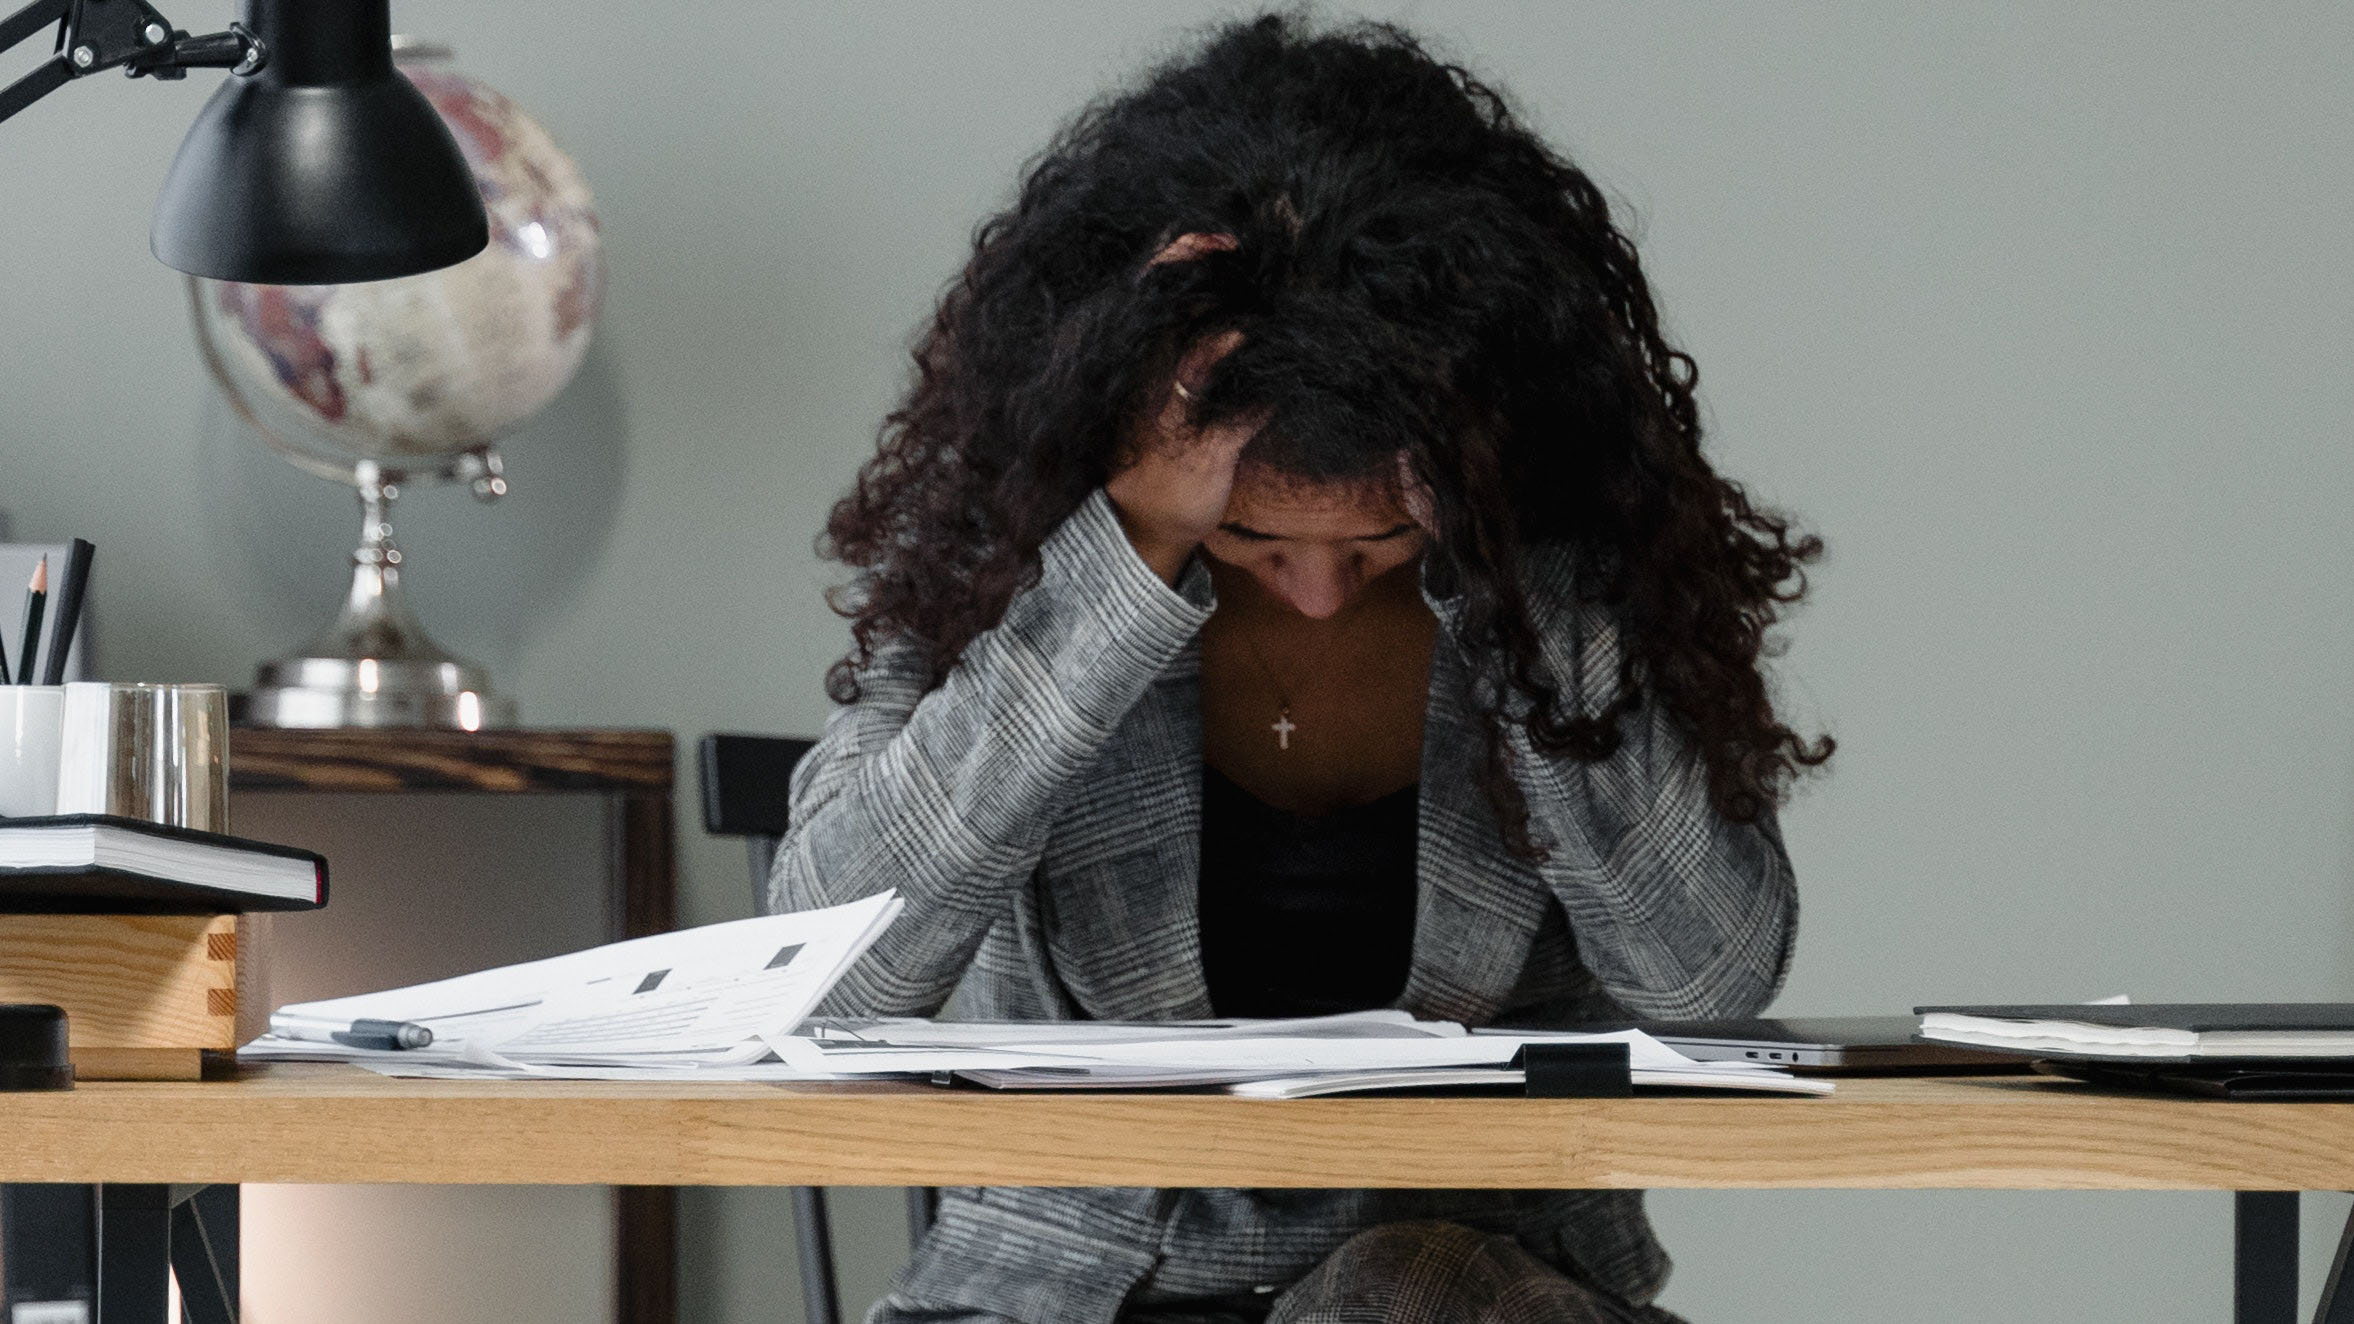 A woman with dark curly hair hold her head, looking down towards a dest piled with papers. She looks stressed.